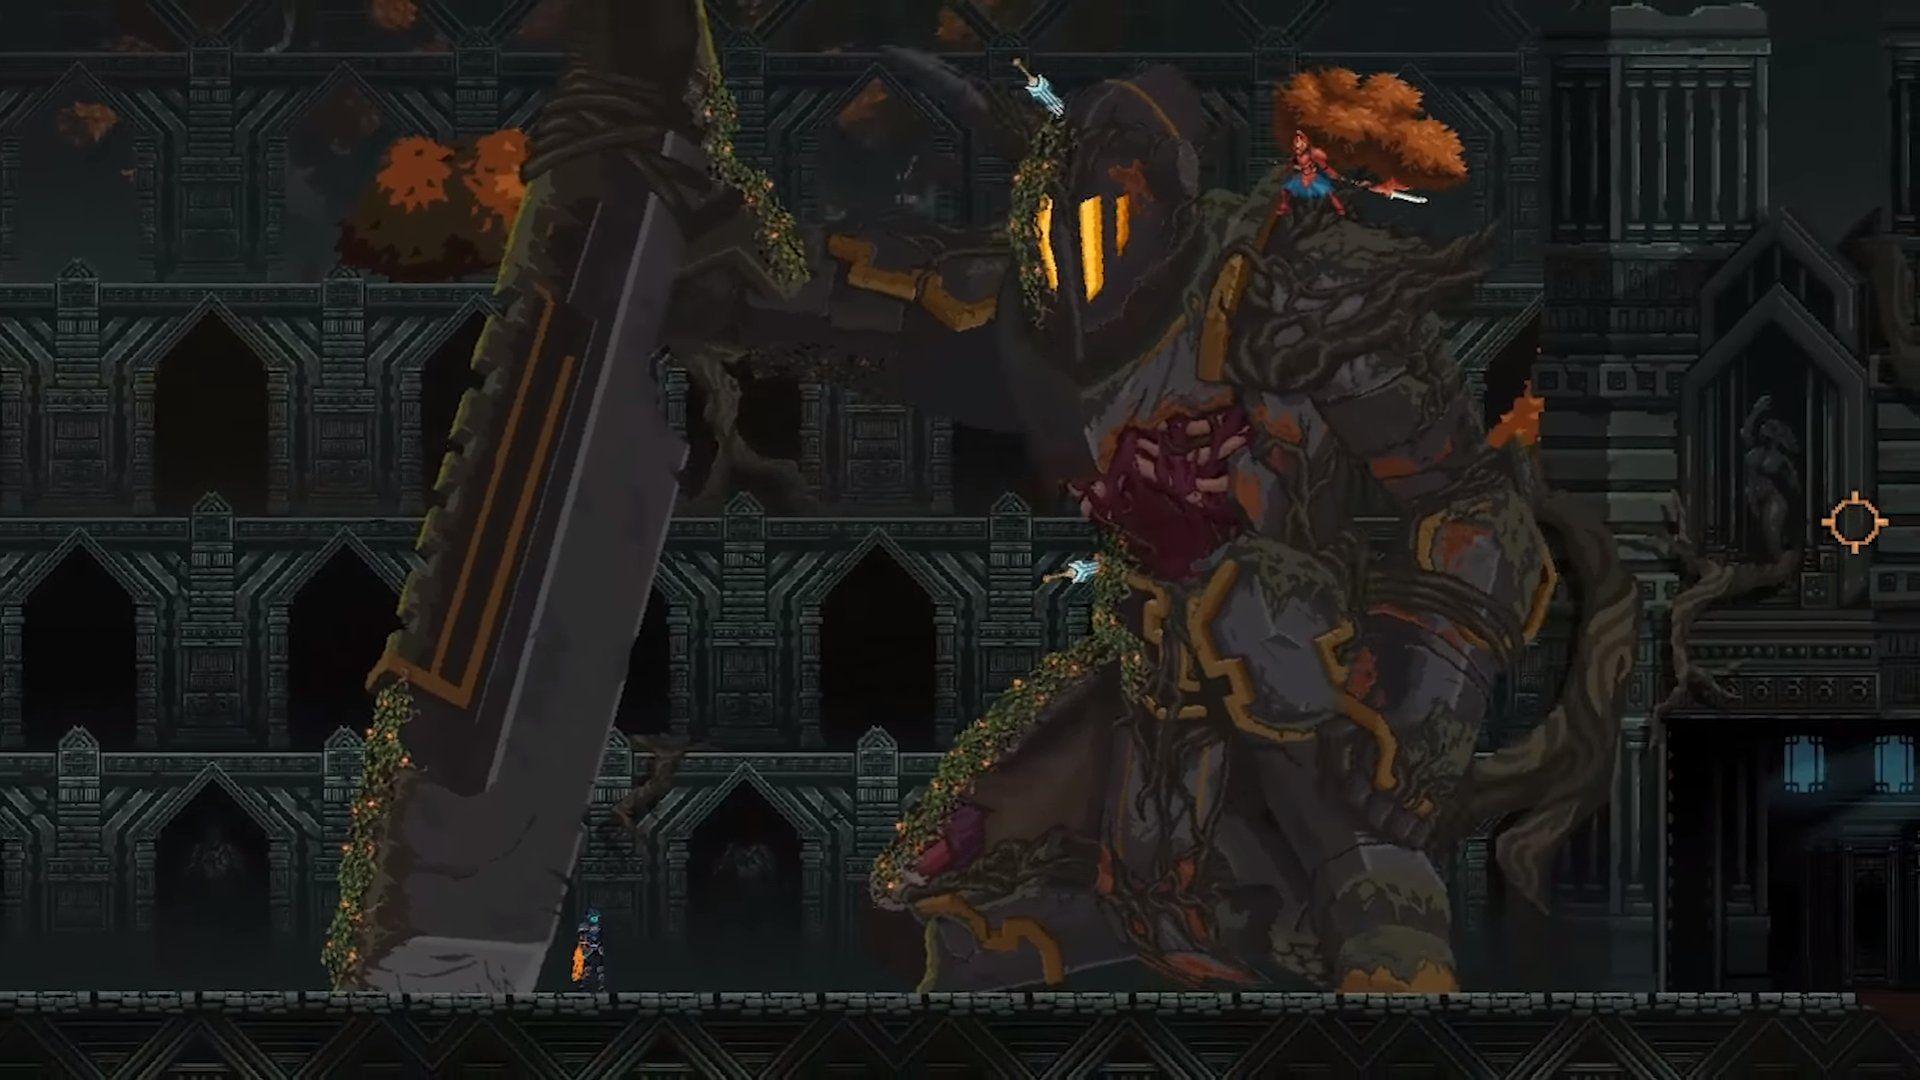 Check Out Some of The Many Bosses of Death's Gambit in this New